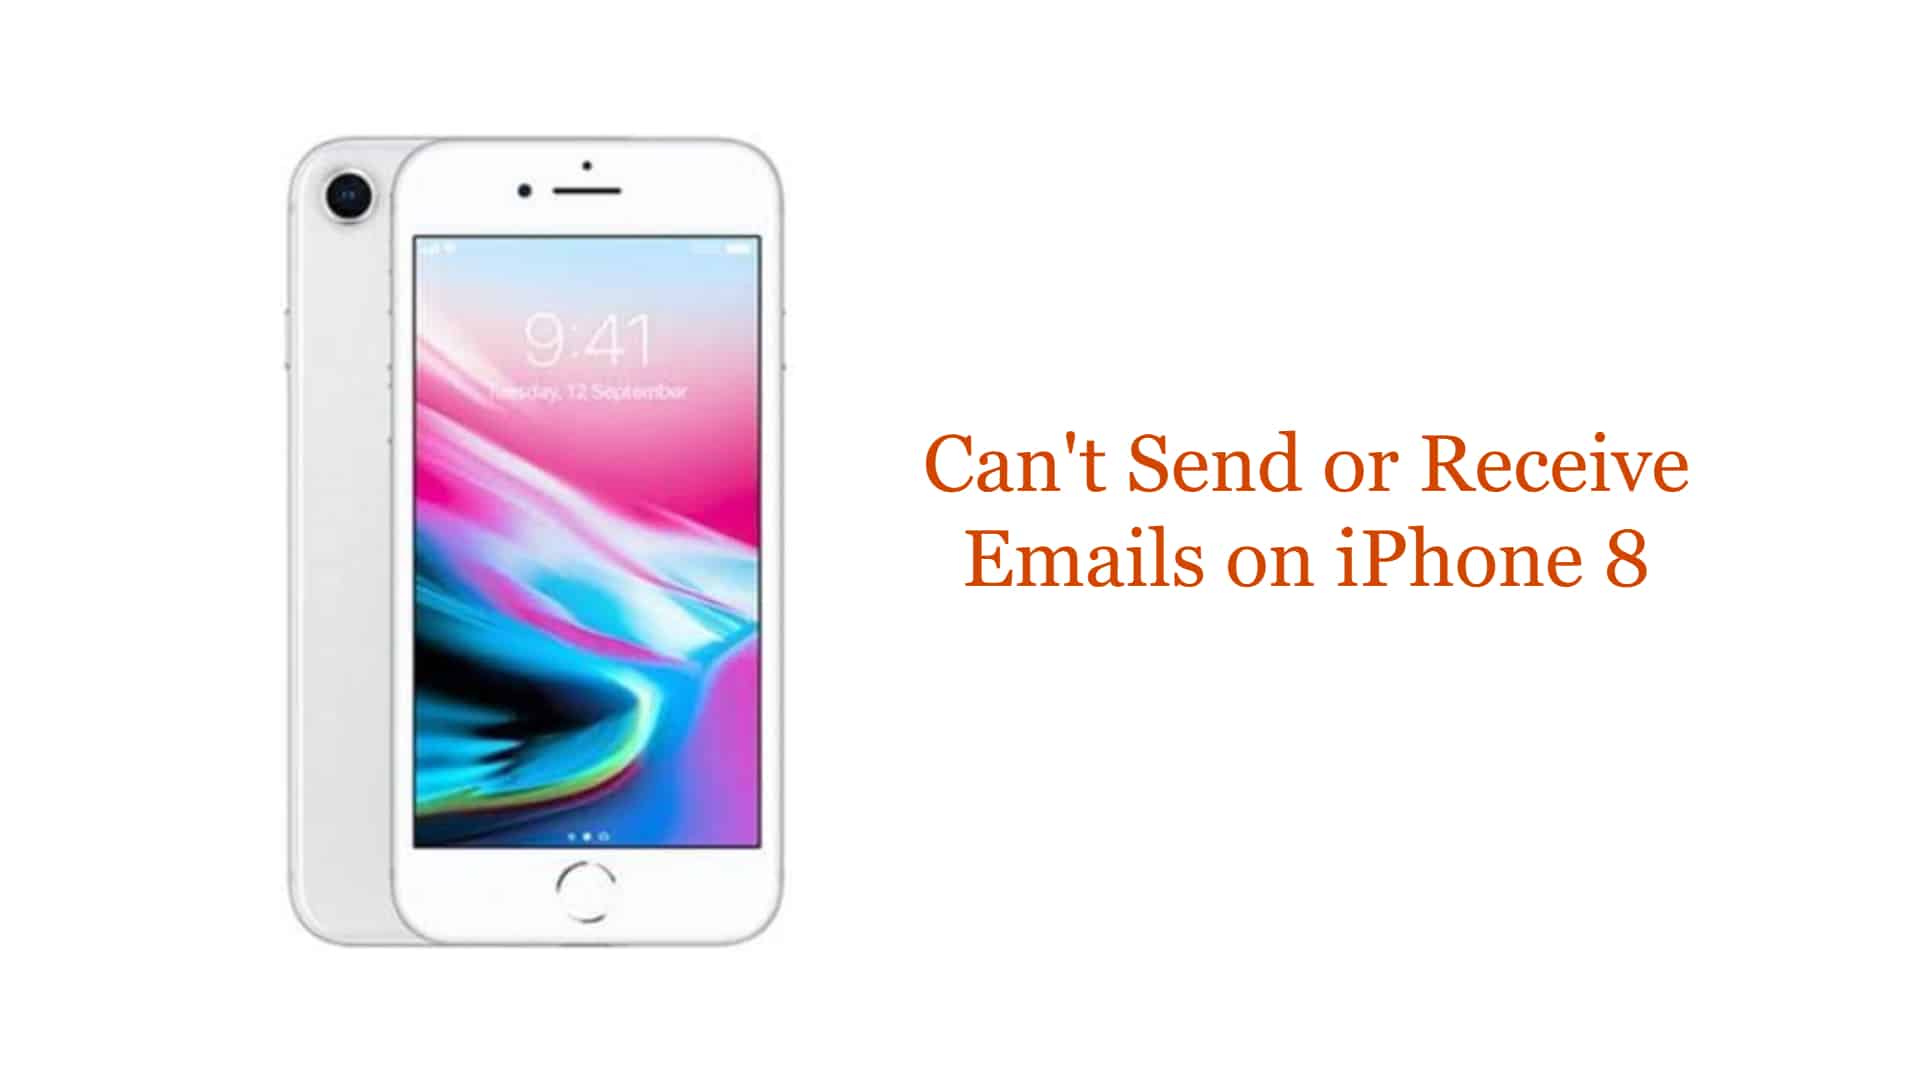 Can't Send or Receive emails on iPhone 8 - TheCellGuide